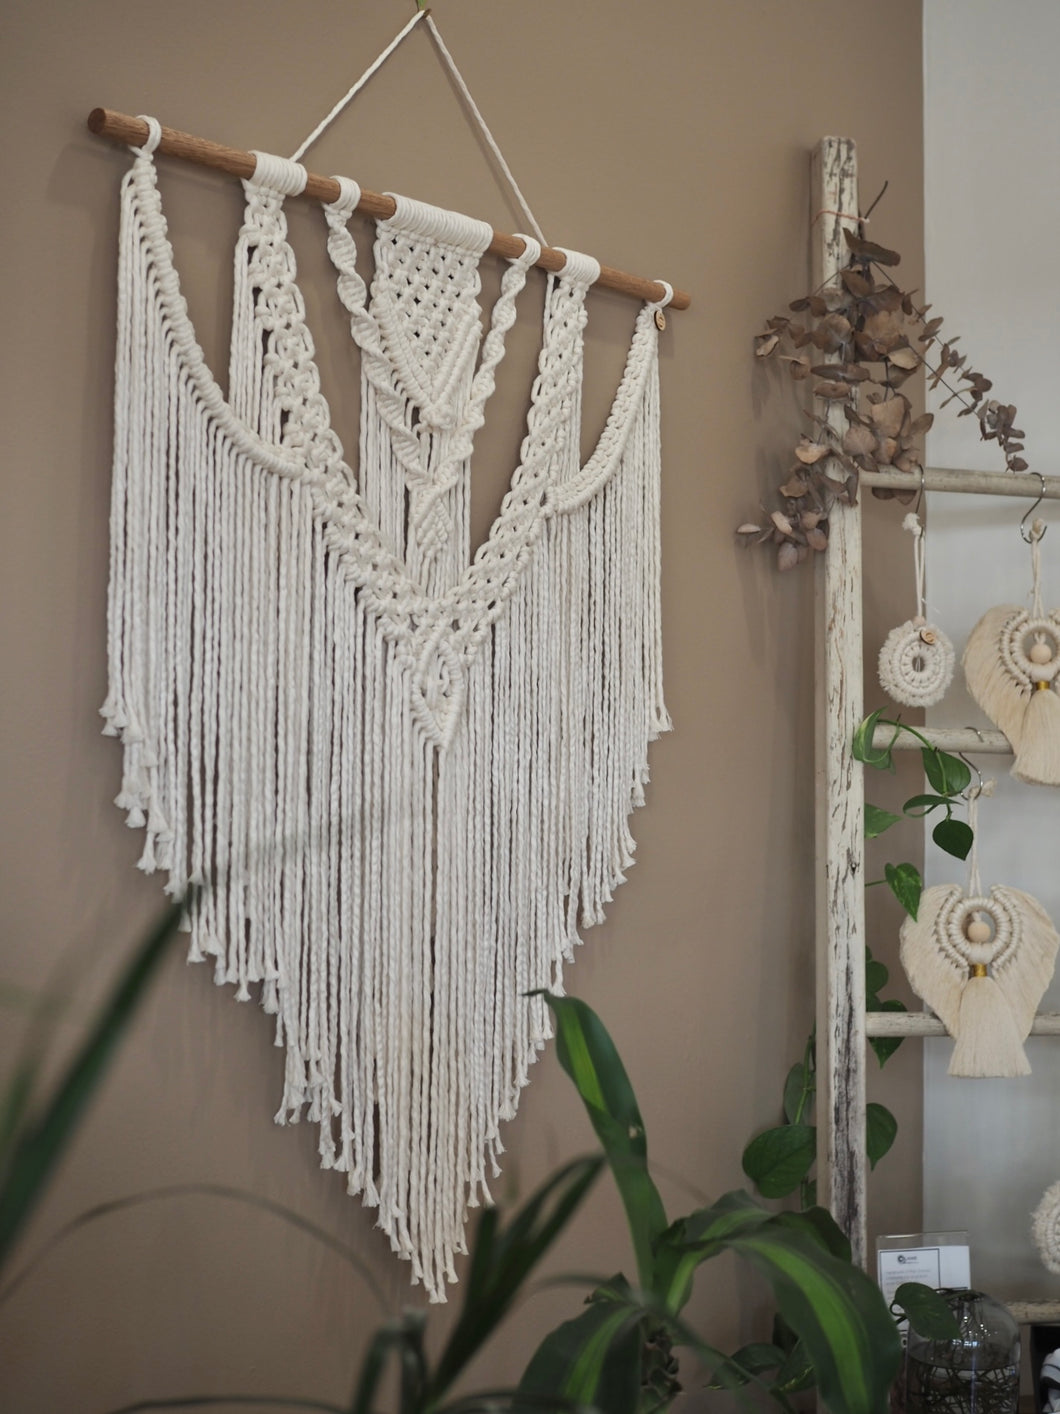 Large Macrame Wall Art, Handmade in Dulwich Hill Sydney, Home Décor, Home improvement, Instead of Picture Frame, cosy home, luxurious, lux, Cotton Bamboo mix fibre, Macrame workshop